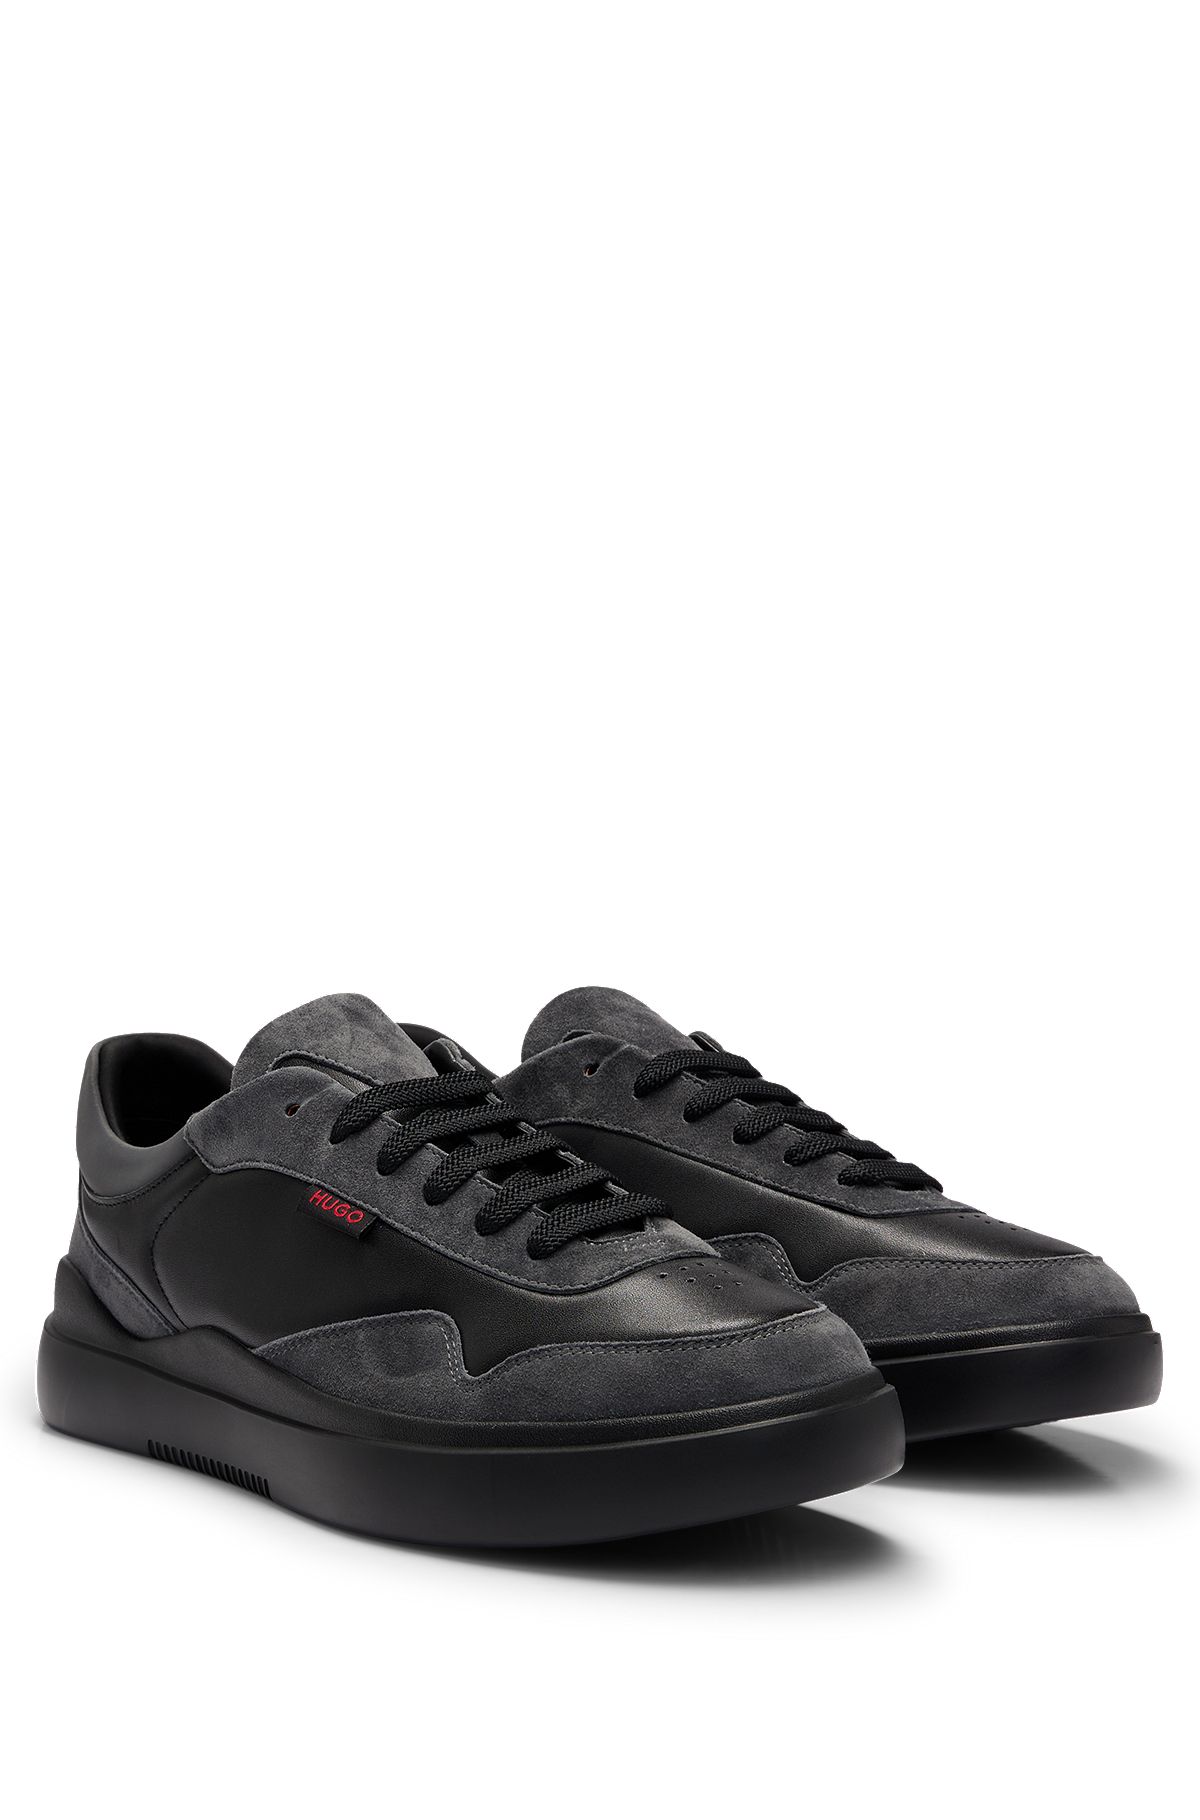 Cupsole-style trainers in leather and suede, Black